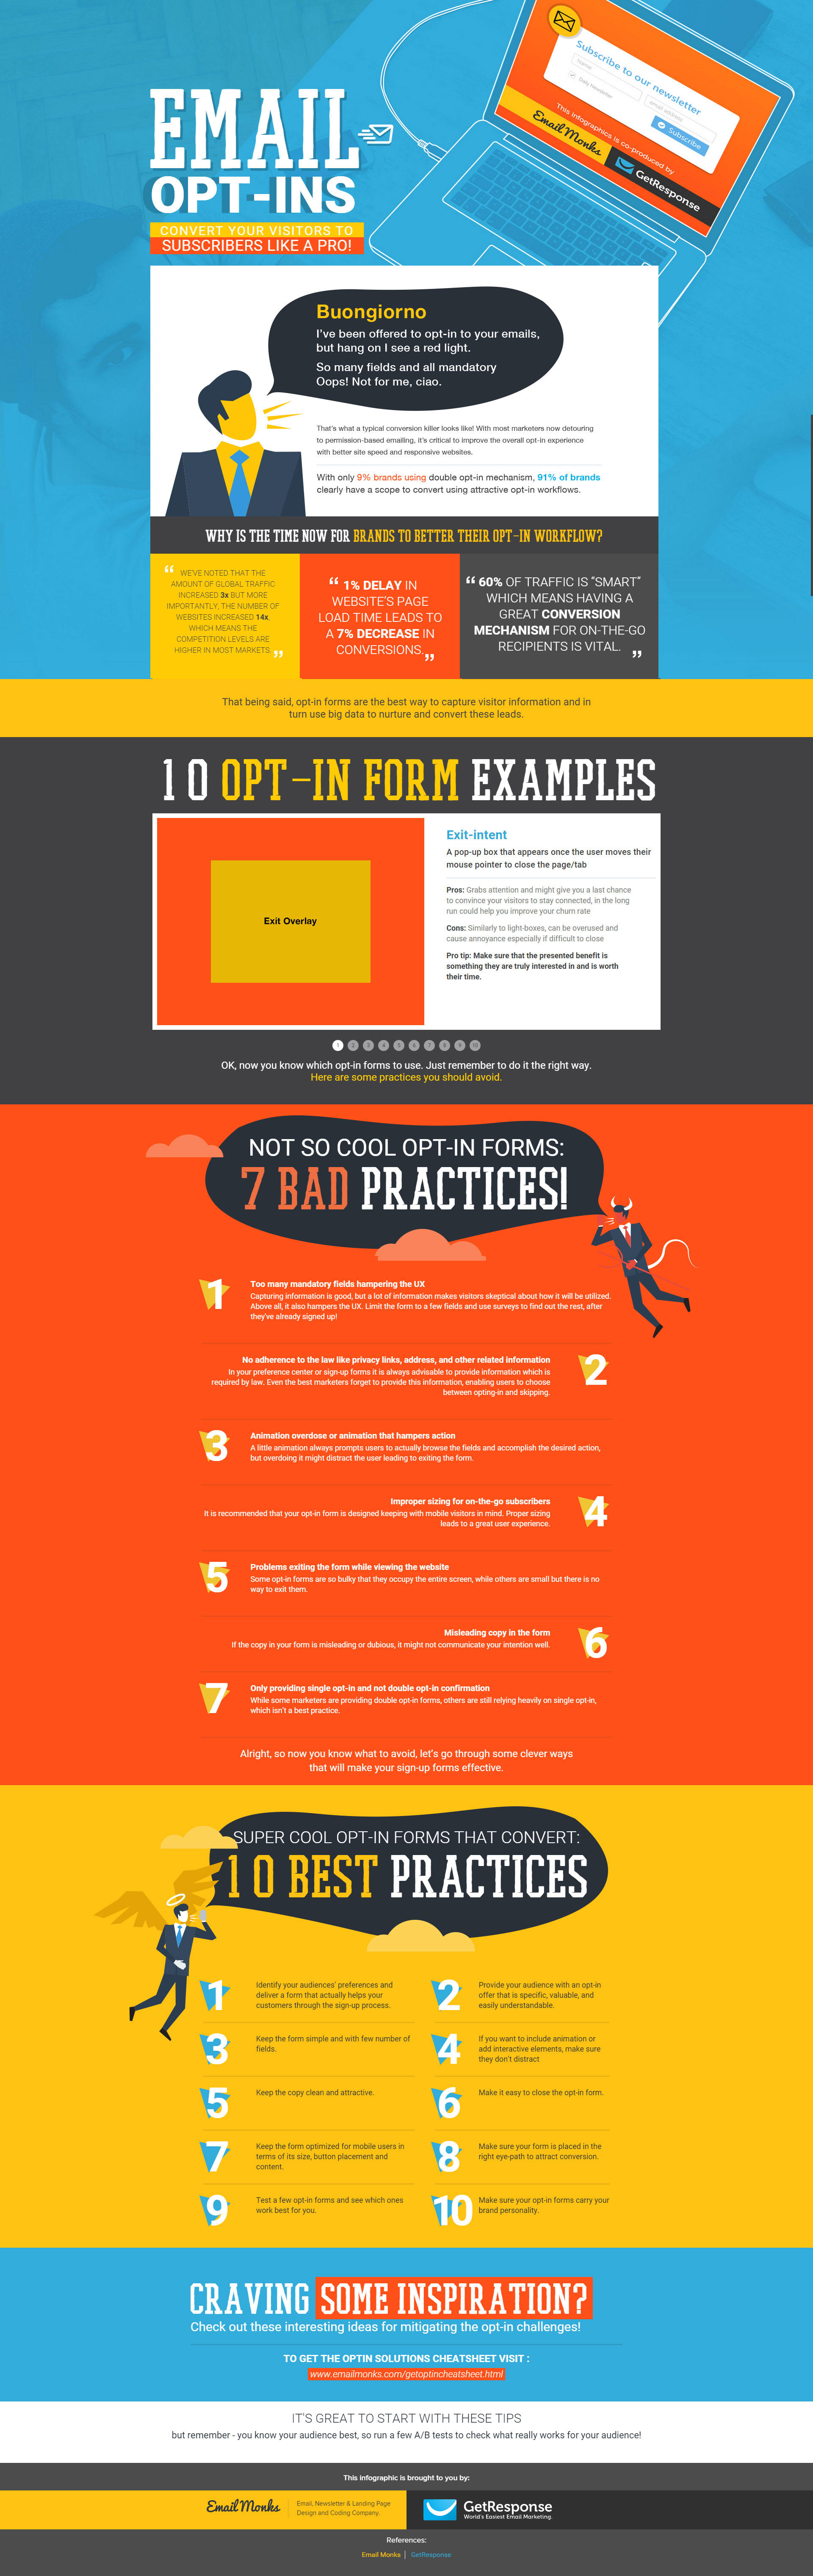 Email Opt-in Infographic: Convert subscribers like a pro